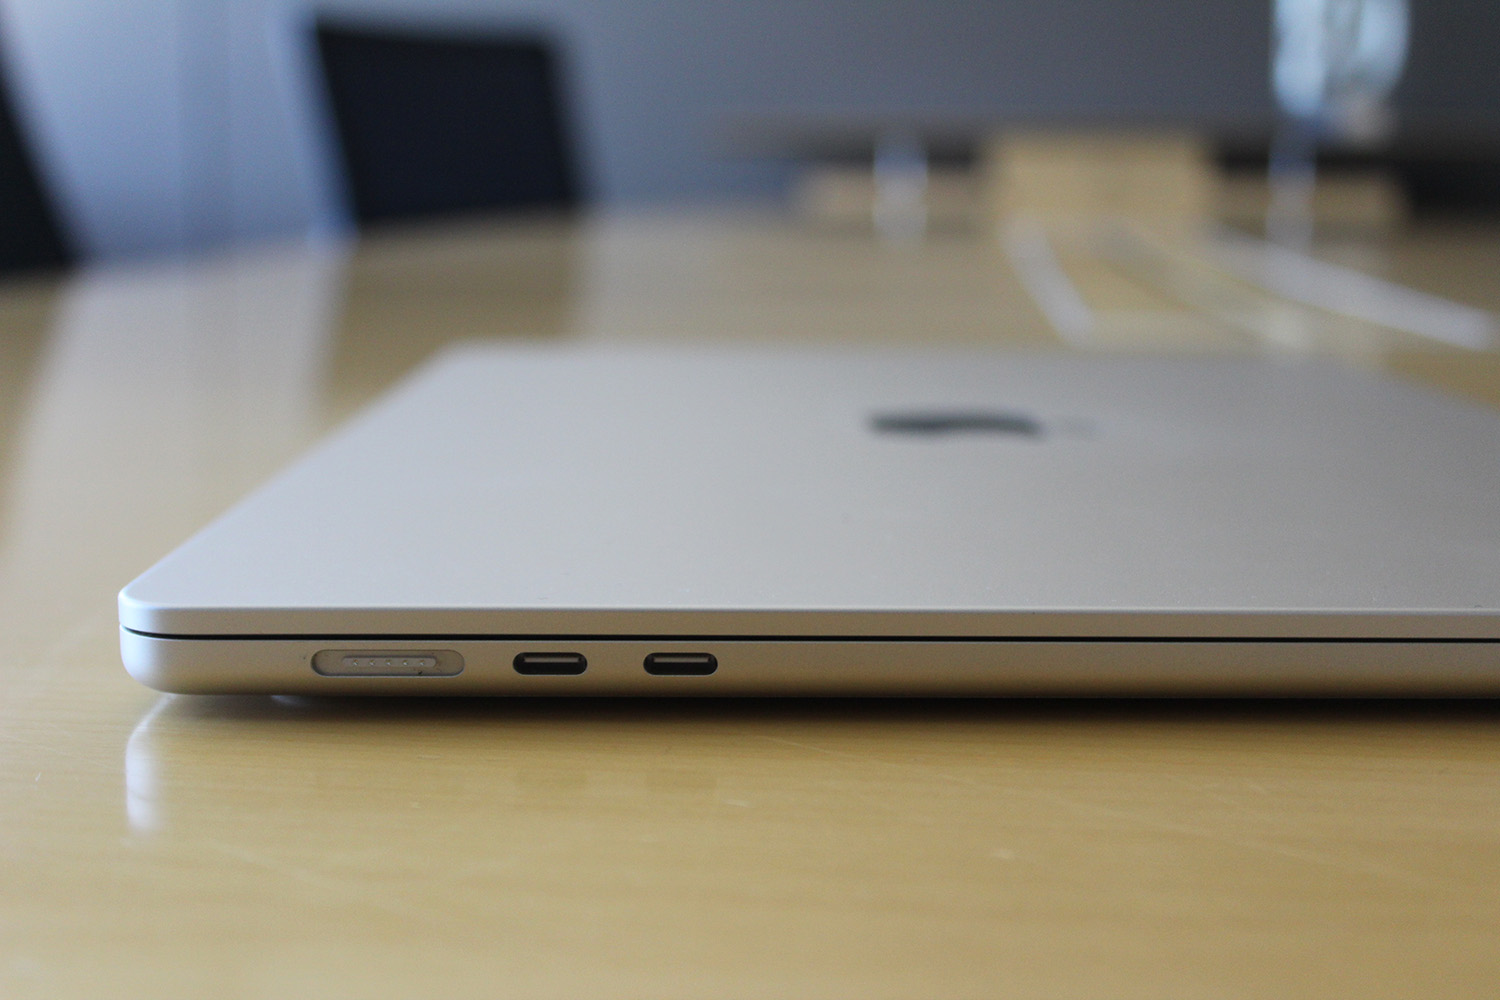 Review: Apple's 15-inch MacBook Air says what it is and is what it